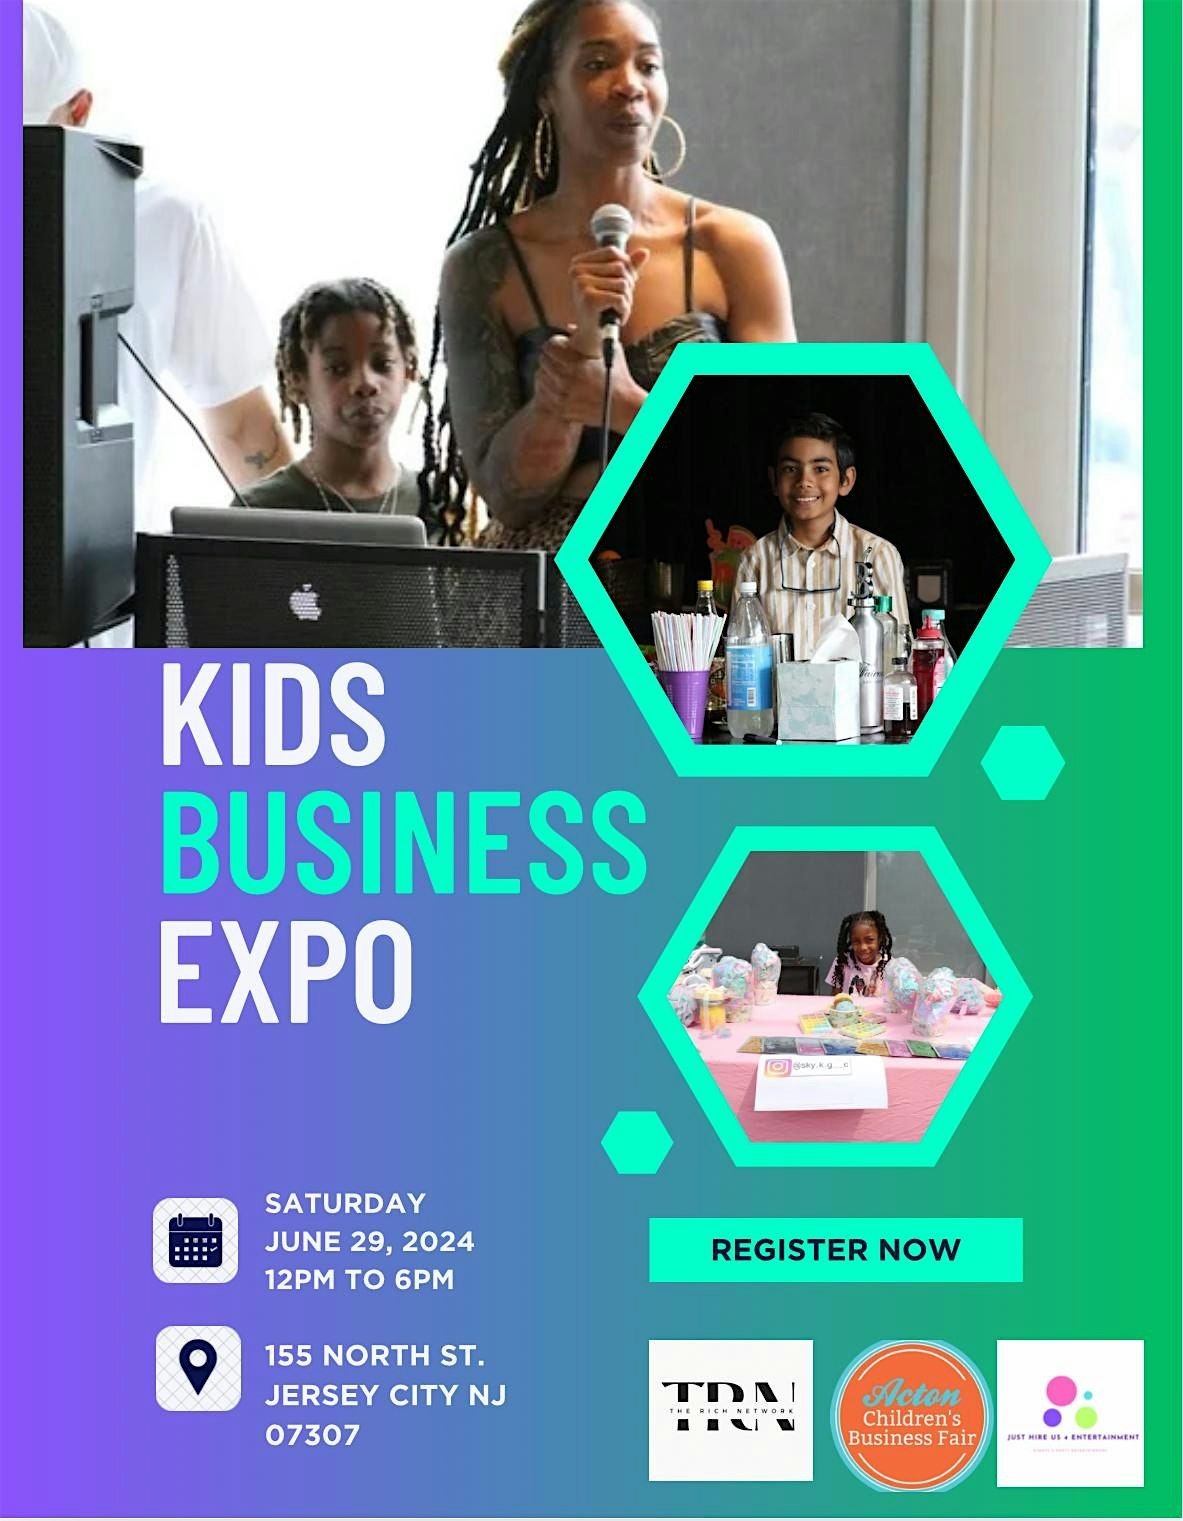 Kids Business Expo